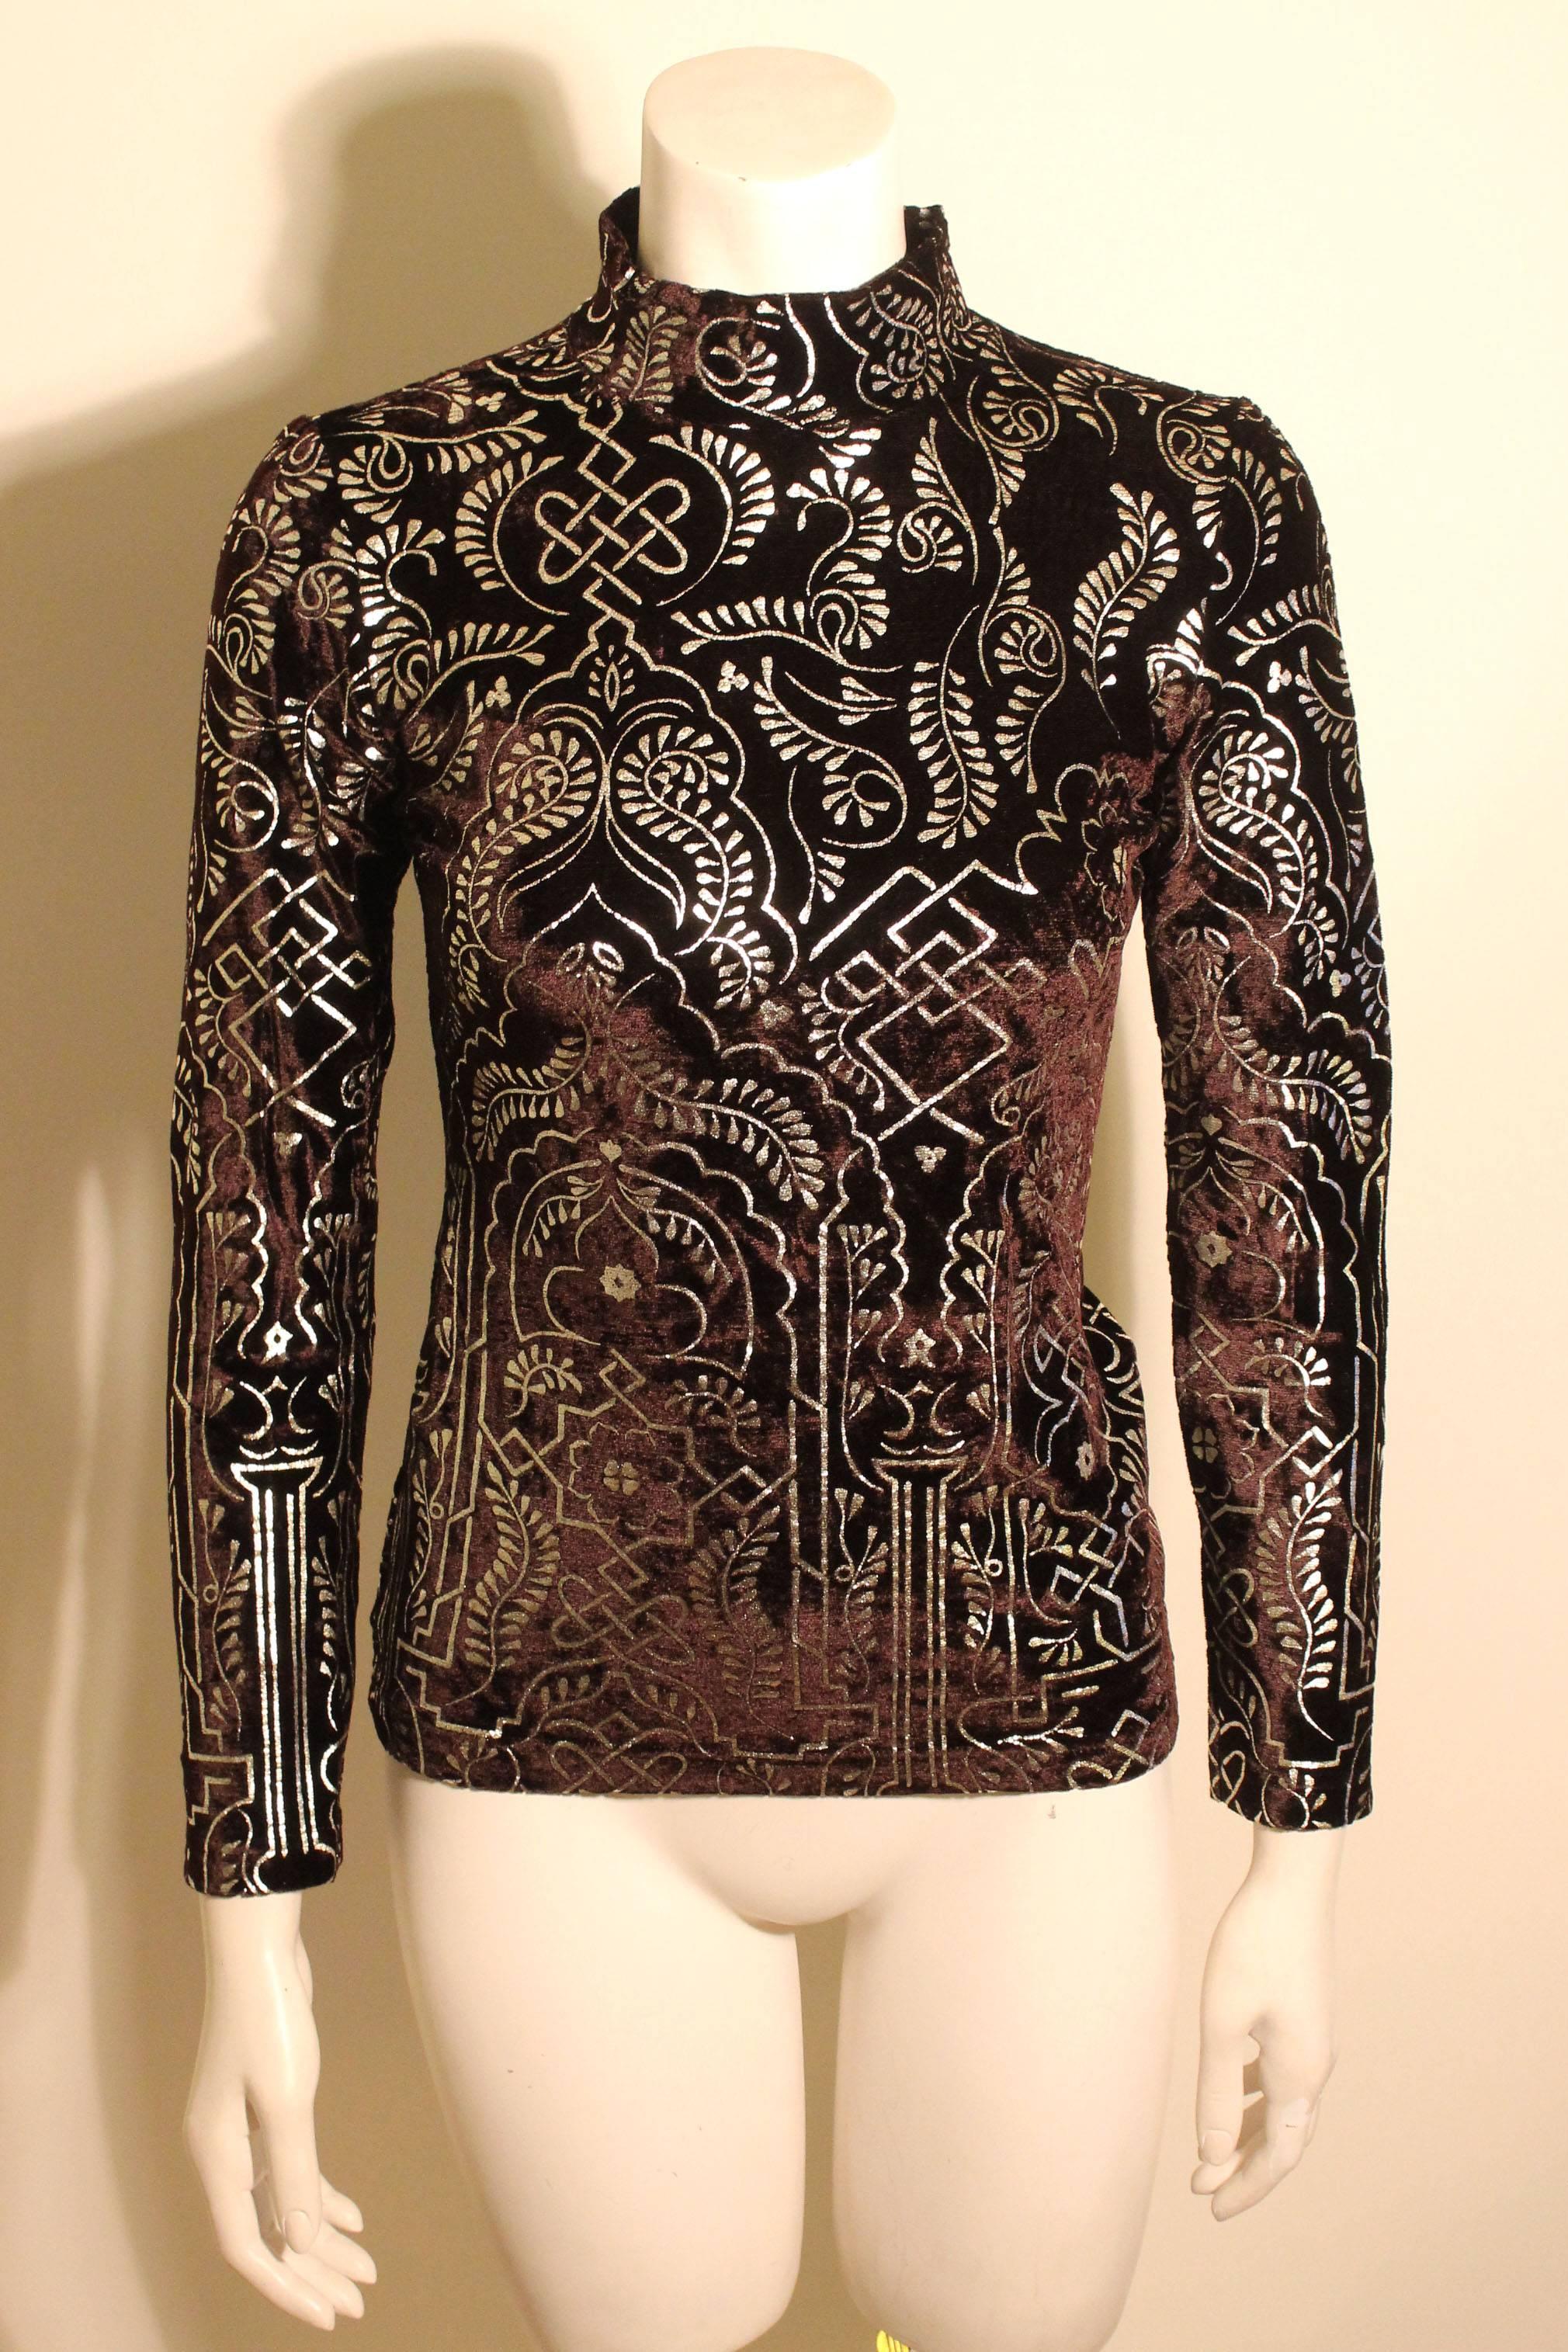 This velvet Joseph Tricot mock neck top is embellished with a silver embossed floral & celtic design. It is hip length, fitted to the body with long narrow sleeves. It is a perfect choice for holiday dressing. 